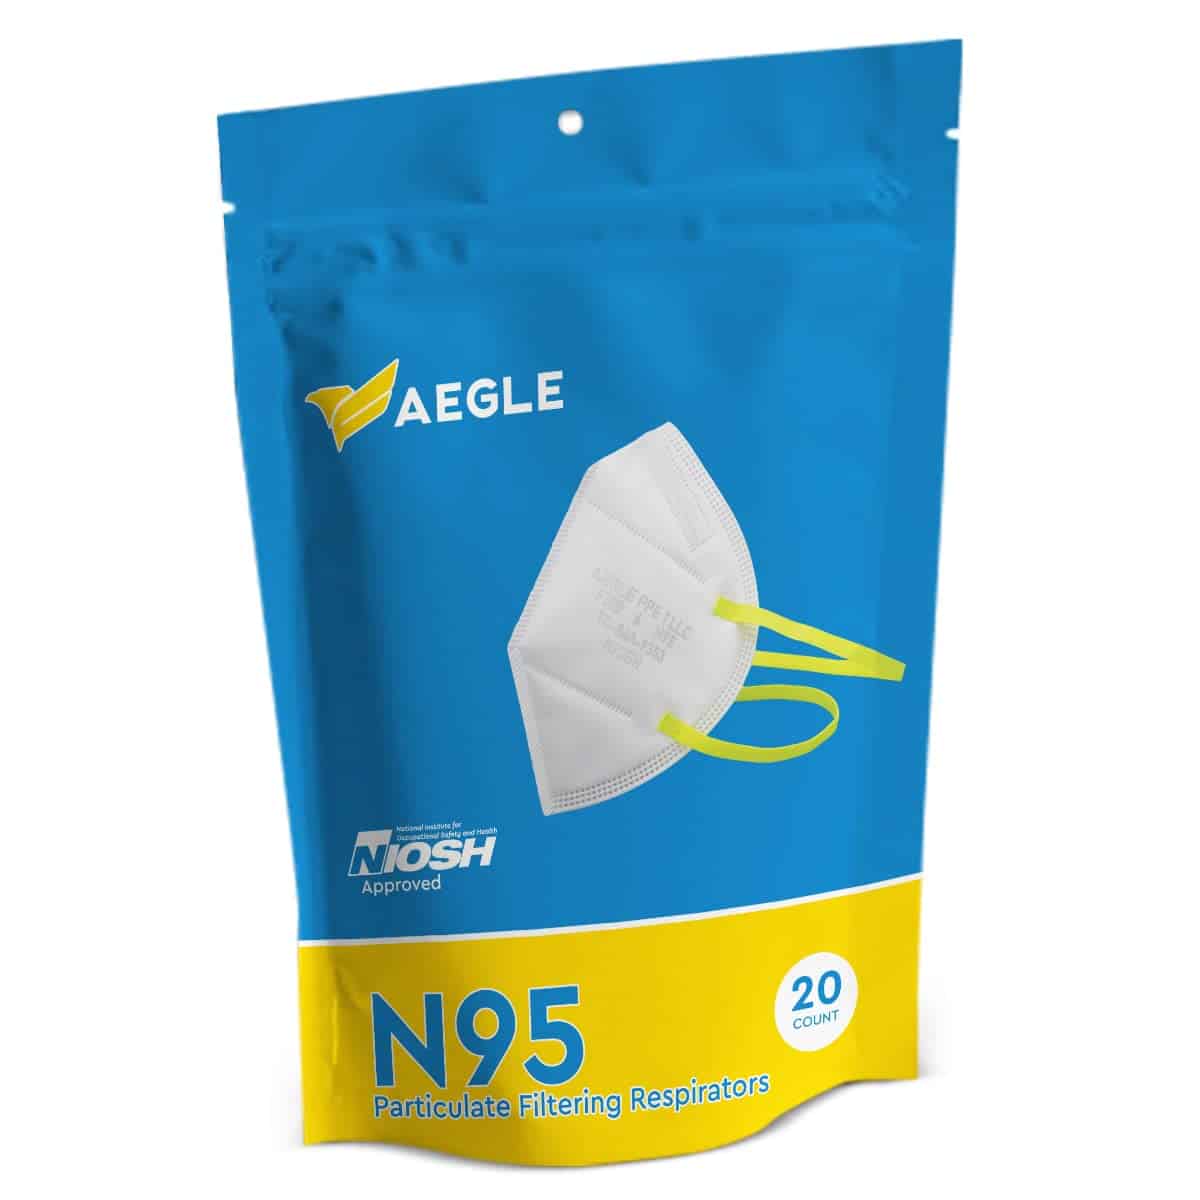 Aegle N95 Mask Foldable, USA, NIOSH-Approved, 20 Pack in Anti-Counterfeit, Respirator, Protective Equipment, STS-F100 1